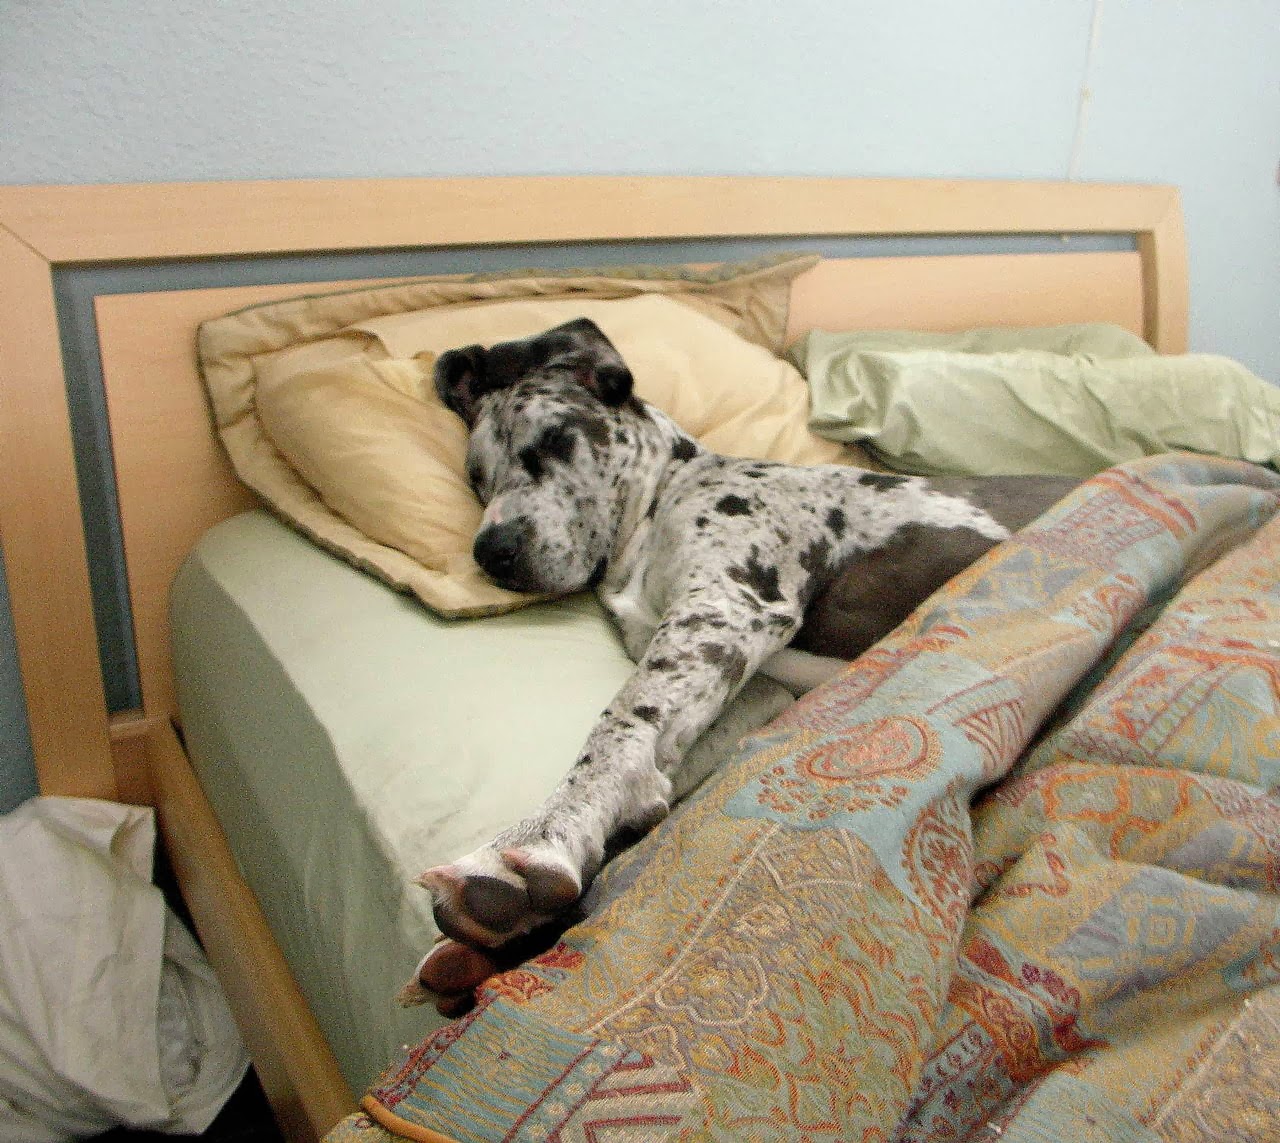 Cute dogs - part 11 (50 pics), dog sleeps in bed